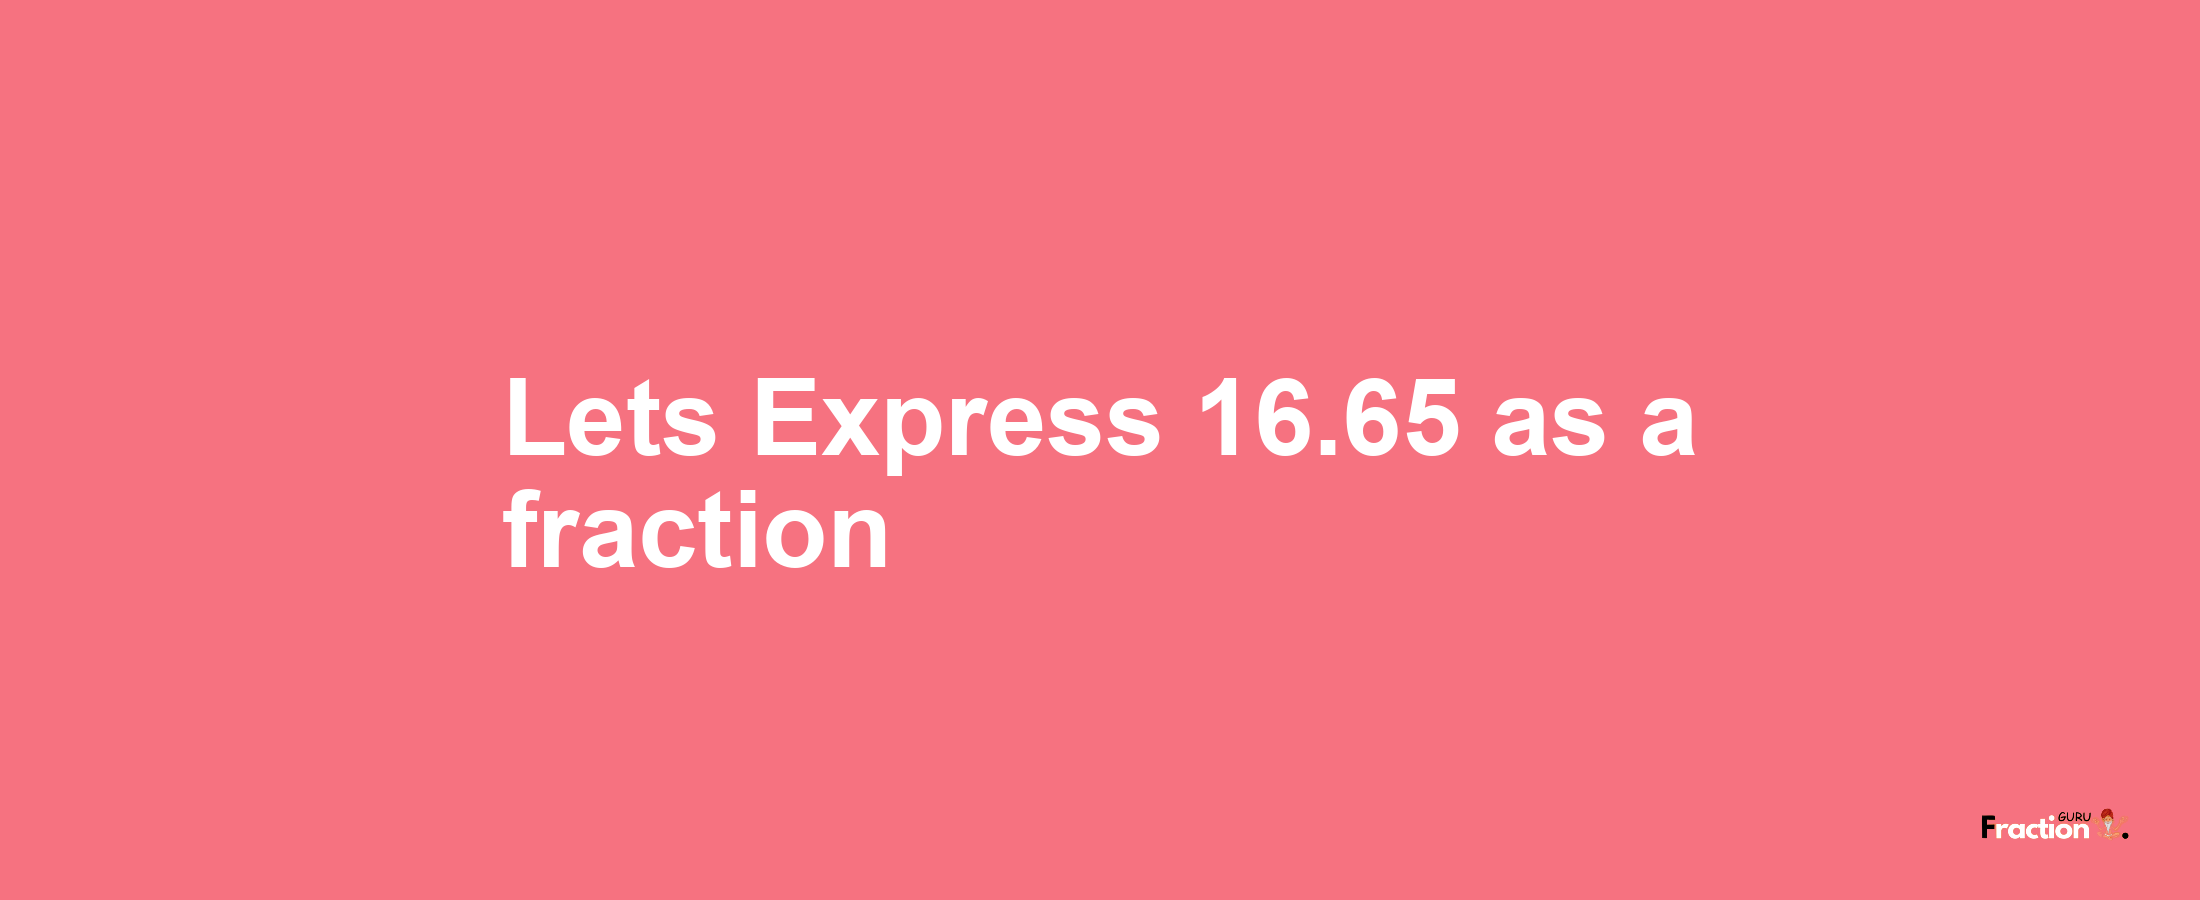 Lets Express 16.65 as afraction